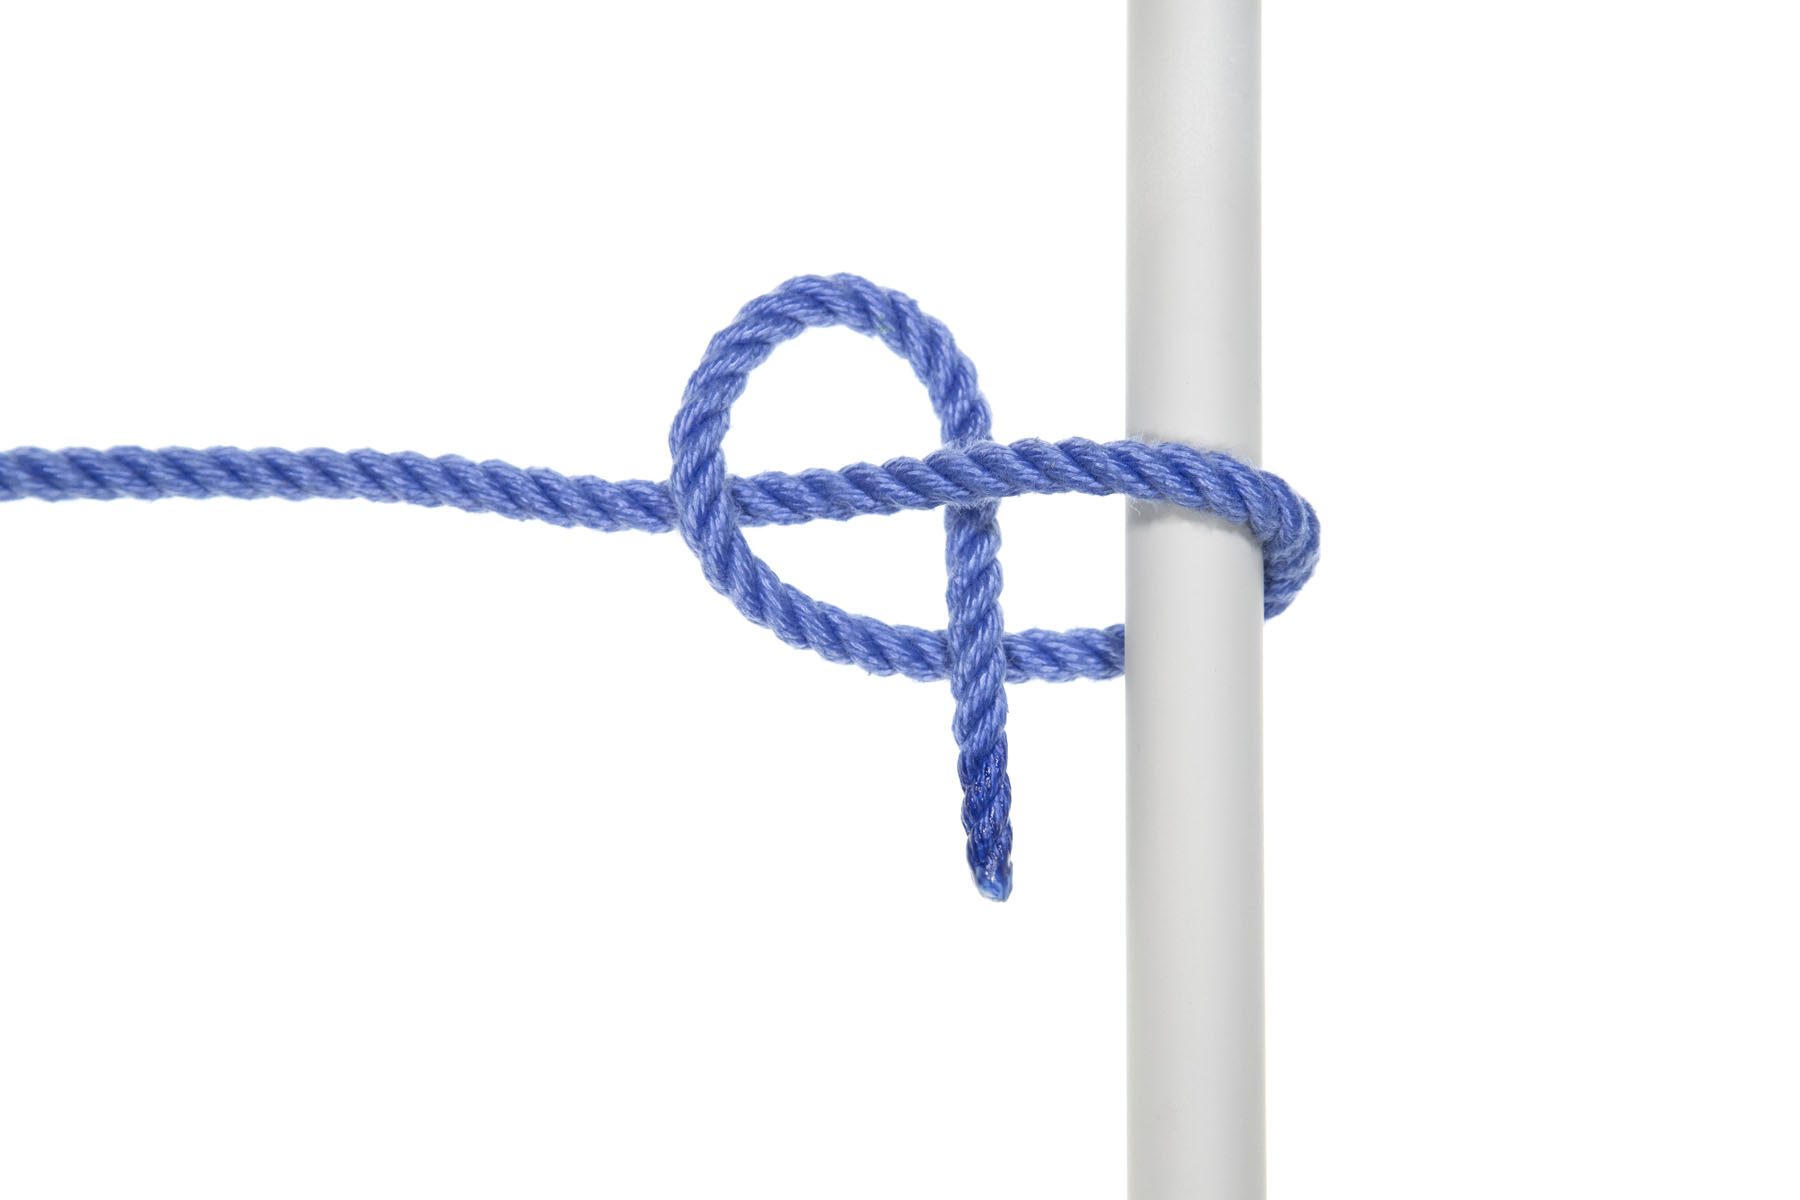 A one inch gray pole crosses the frame vertically. A blue rope enters from the left and goes over the pole, doubles back under it, crosses over the standing part, under the standing part, and over itself, making a half hitch around the pole.